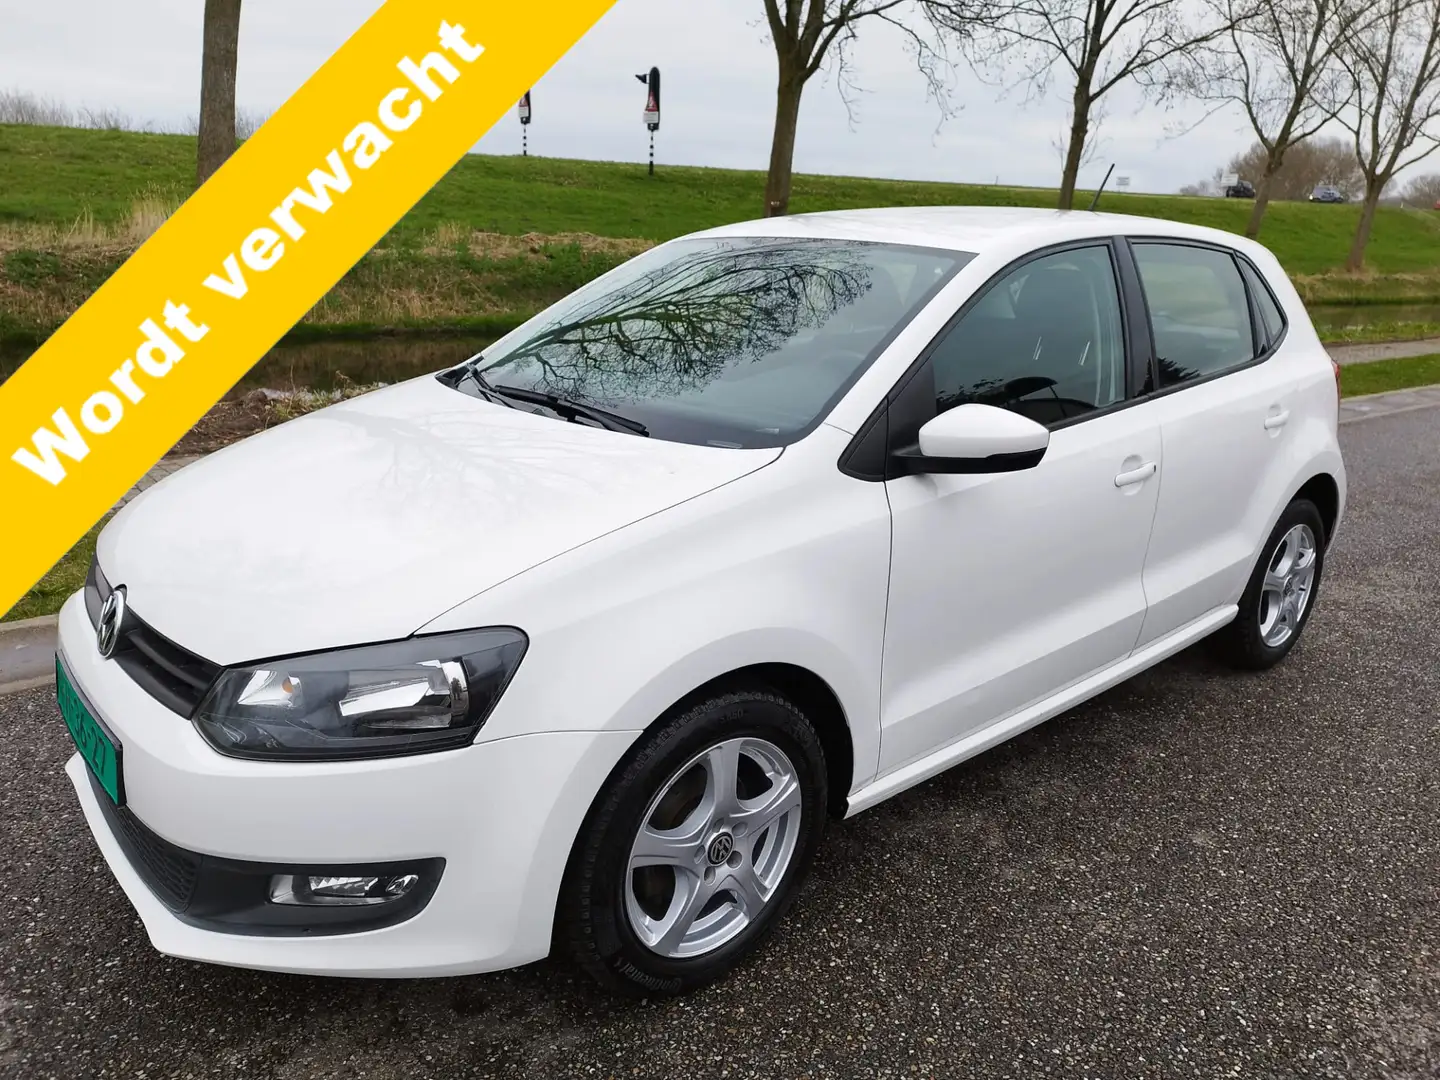 Volkswagen Polo 1.2-12V ** 5 DRS ** 138.528 km ** Airco ** Stoelve Weiß - 1